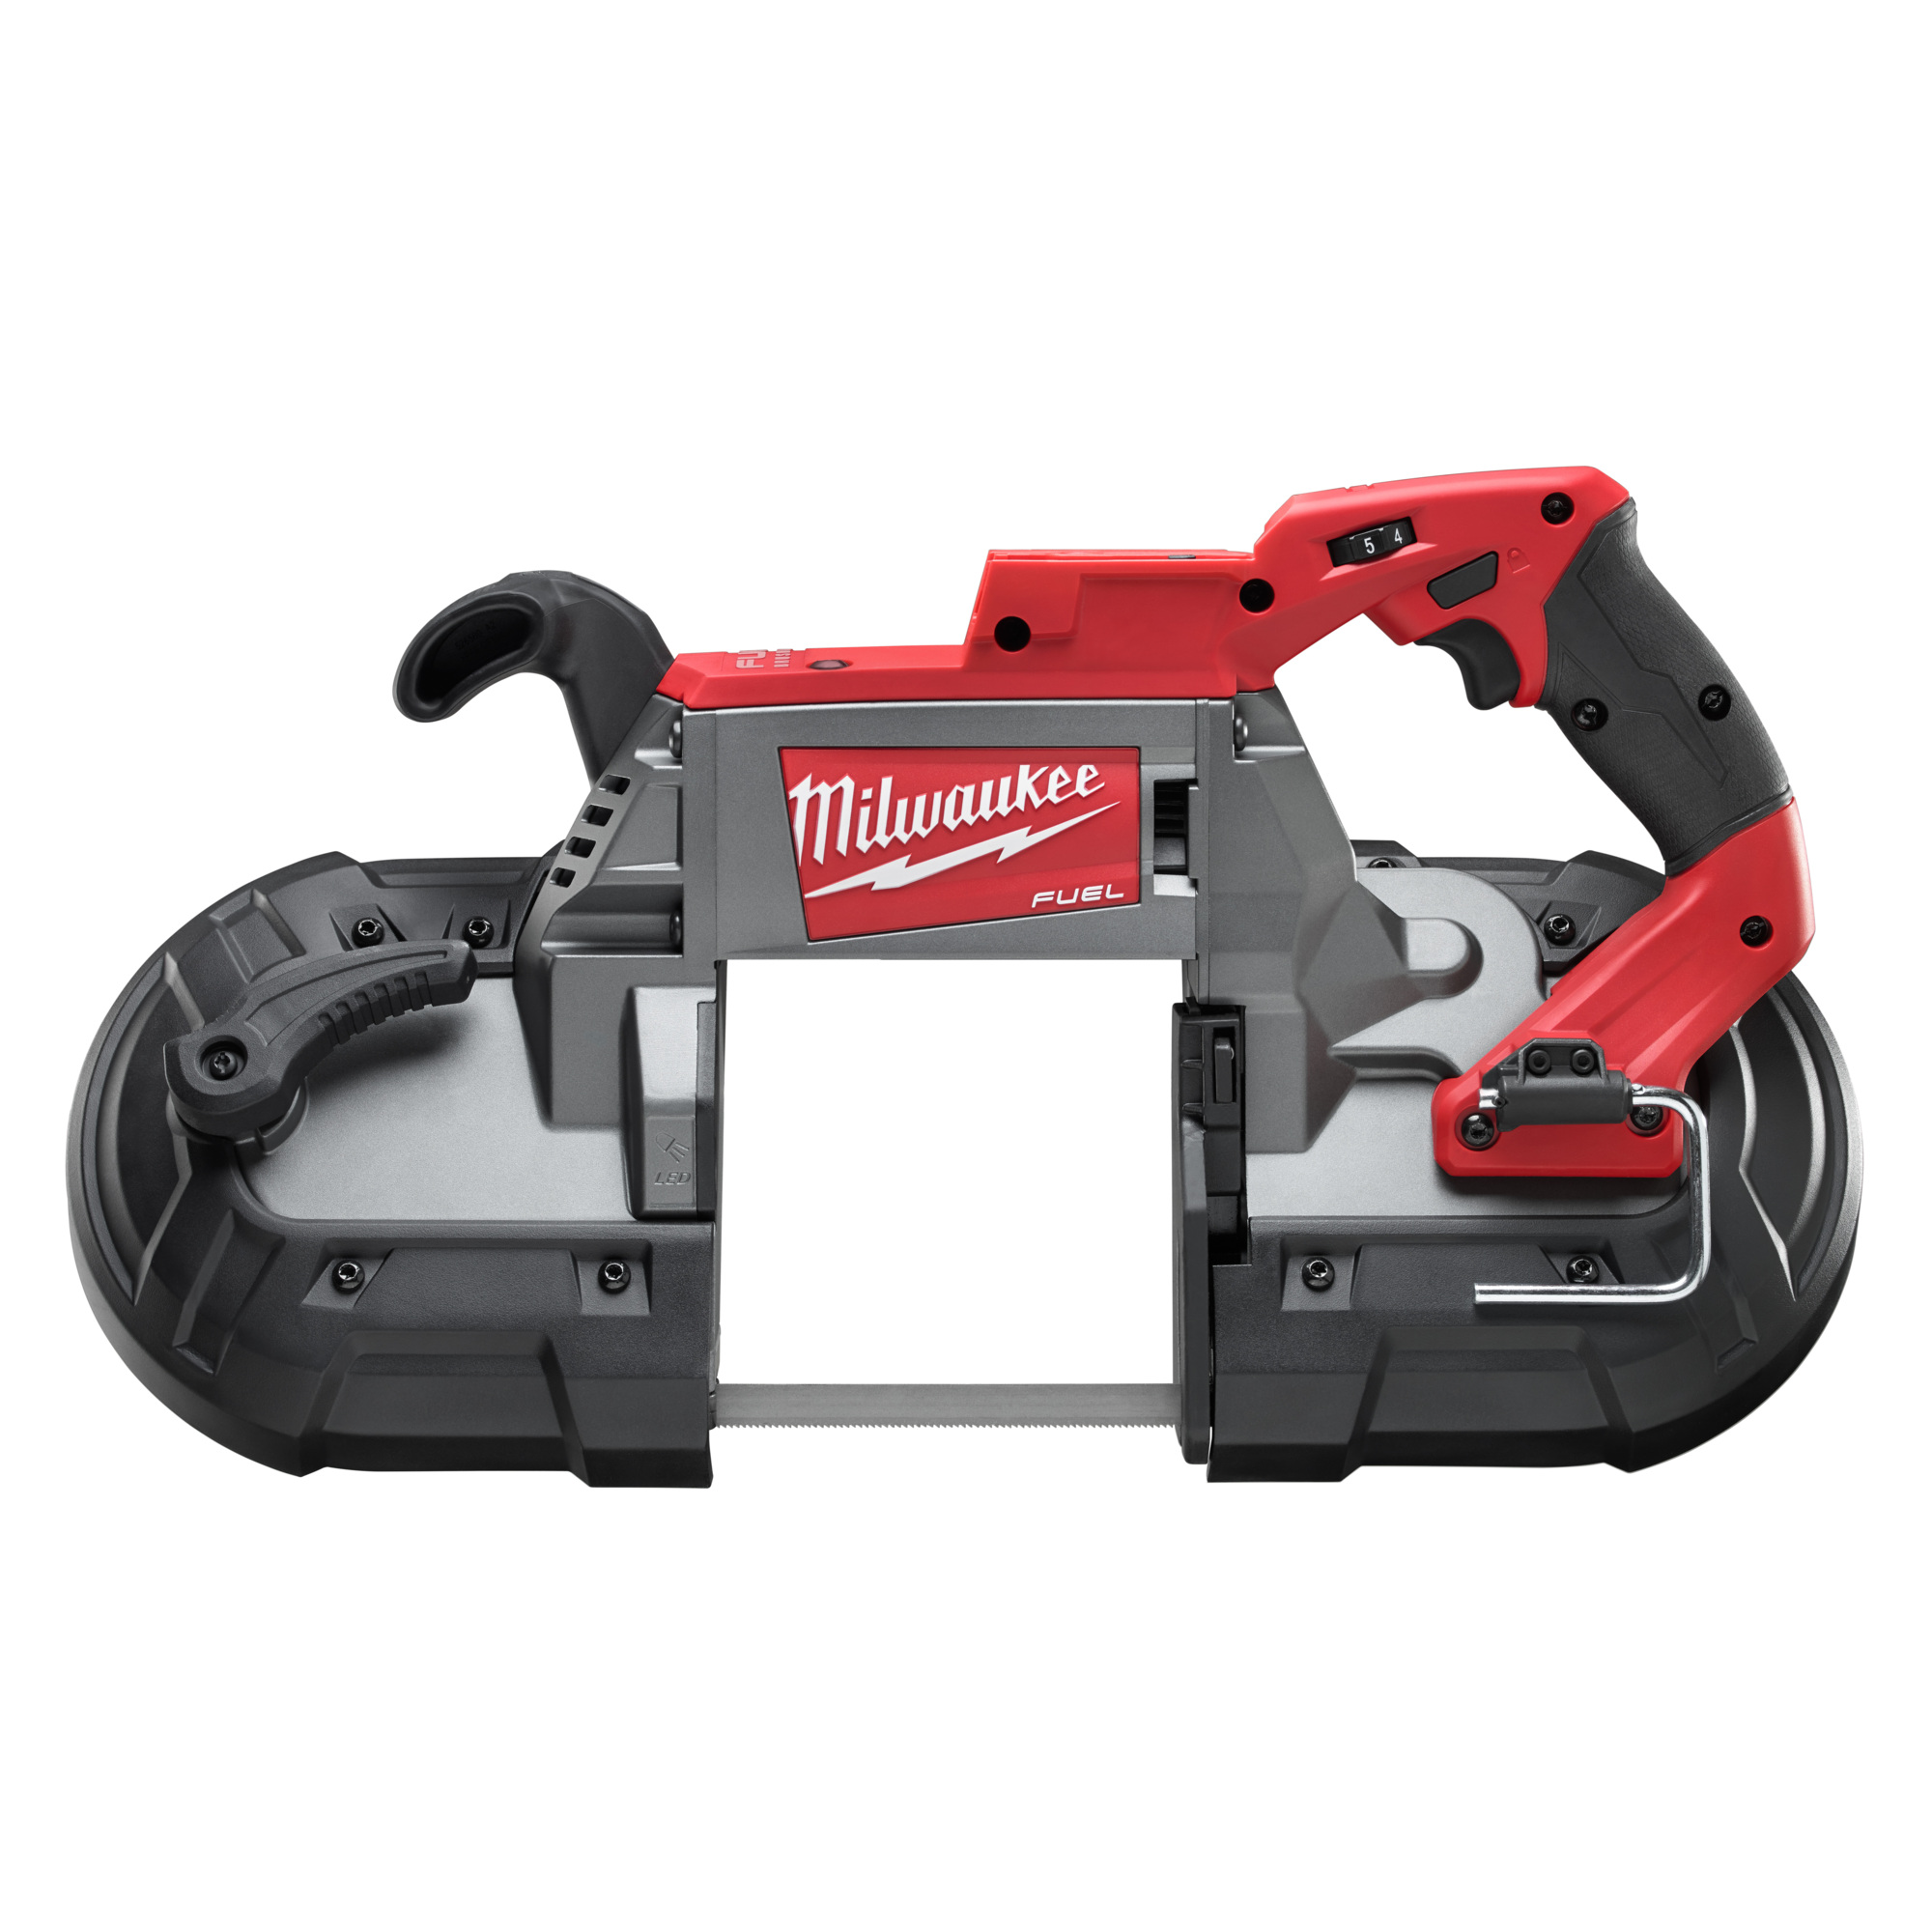 Milwaukee M18 FUEL Cordless Deep Cut Band Saw, Tool Only, Model 2729-20